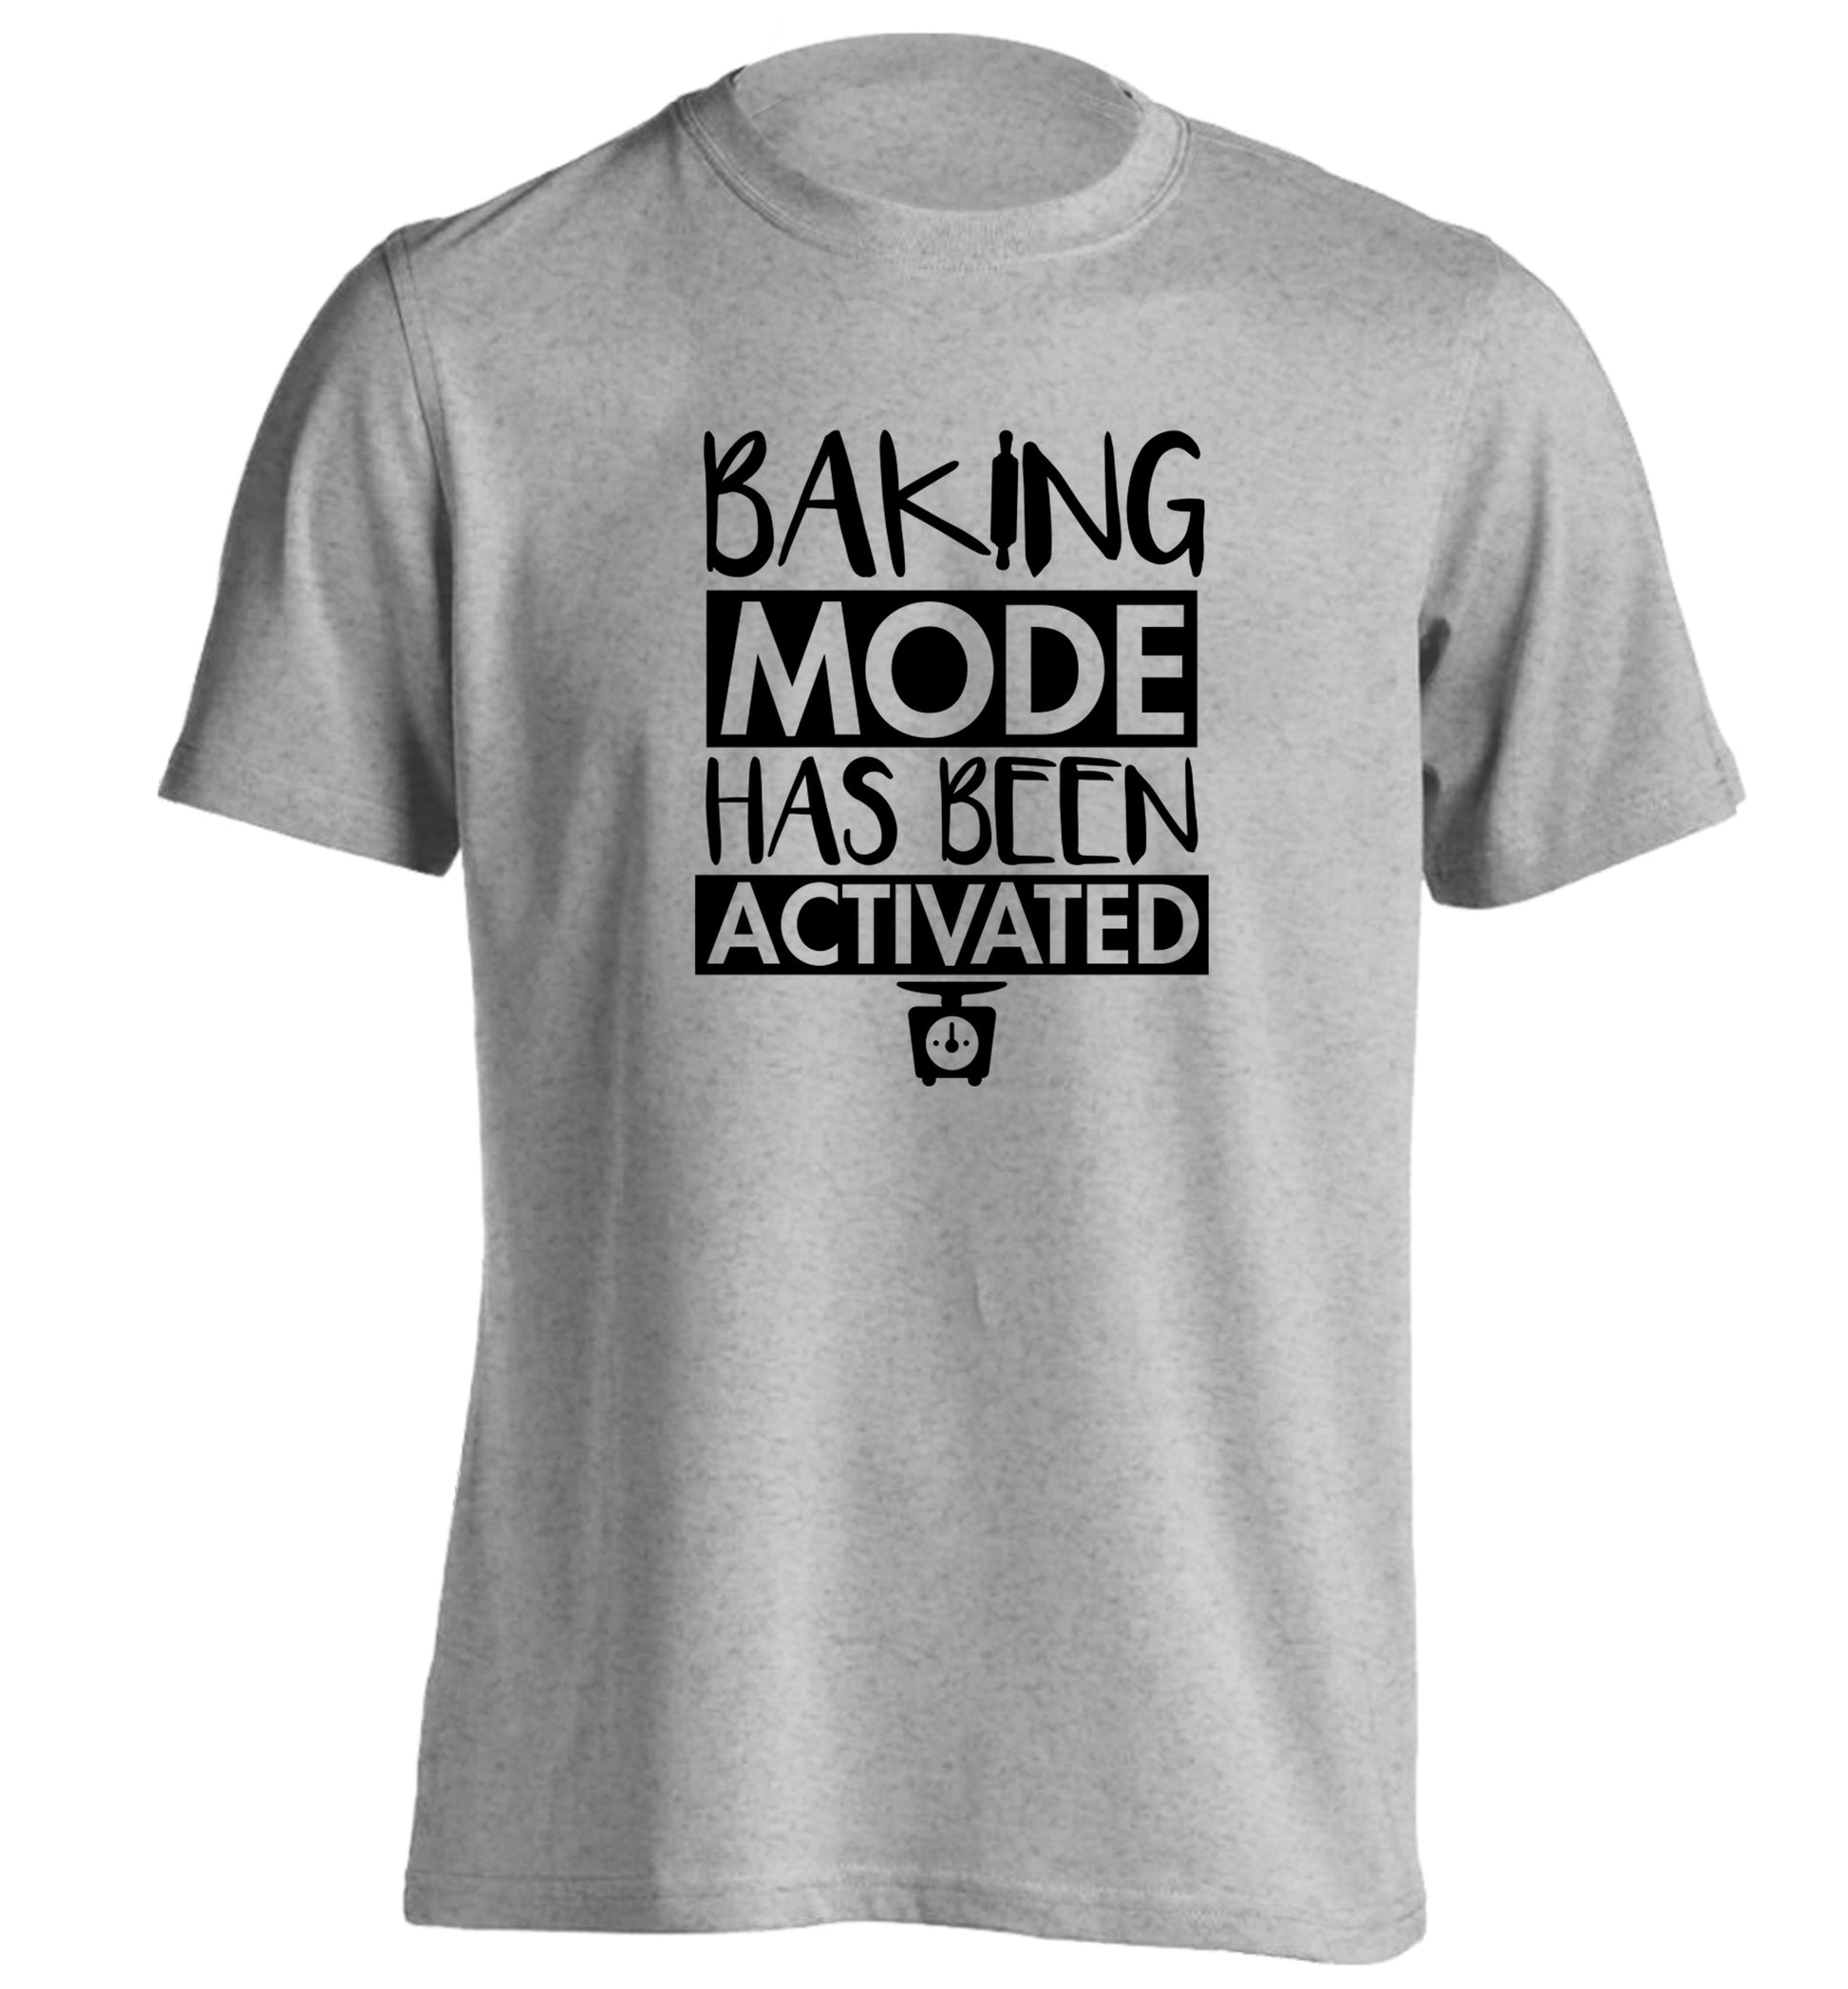 Baking mode has been activated adults unisex grey Tshirt 2XL